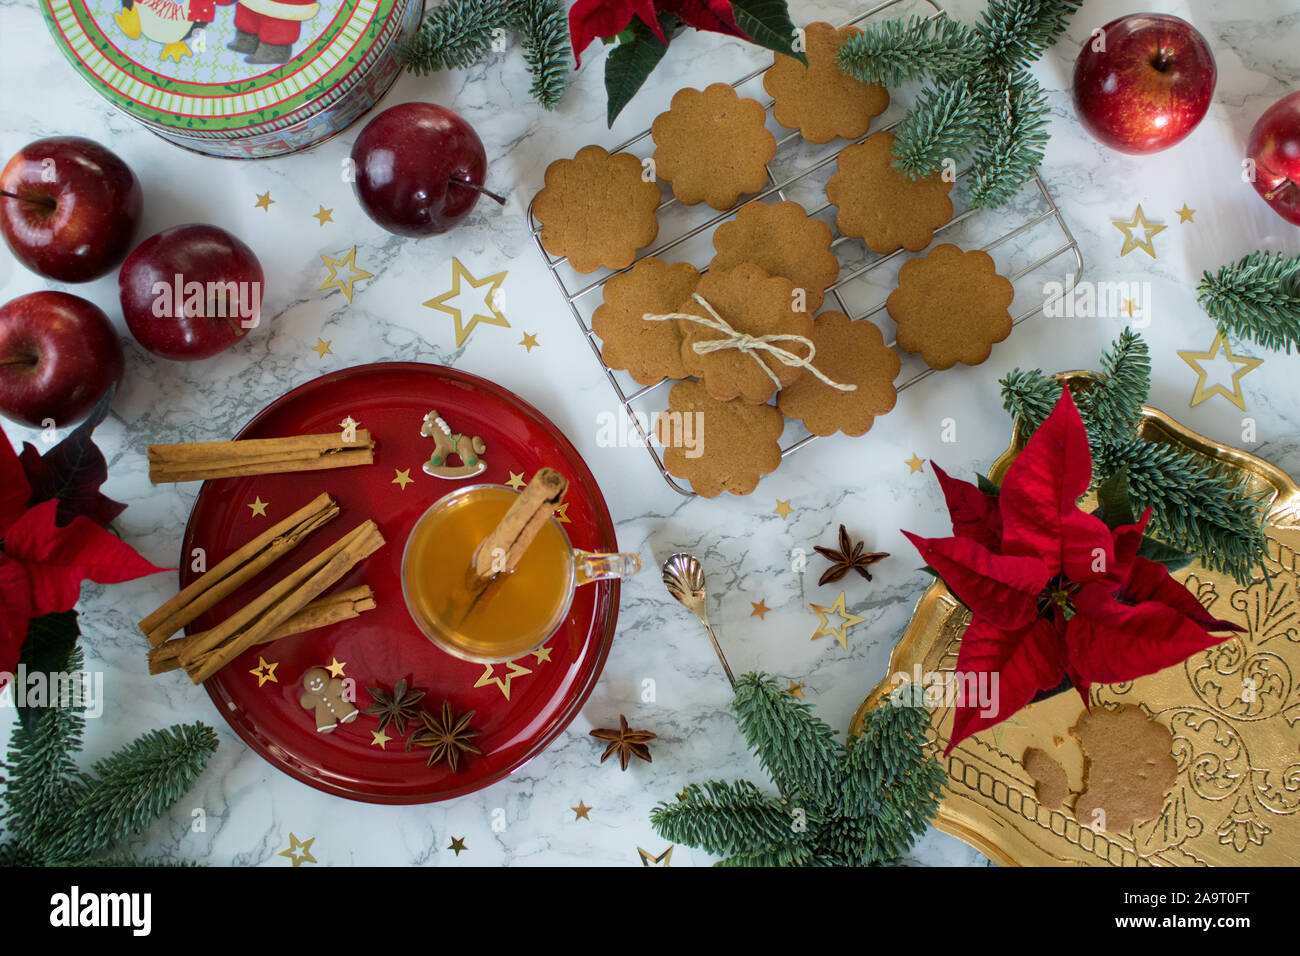 Food photography of a marble table top decorated with chic classy red and gold Chistmas cookies and spices Stock Photo